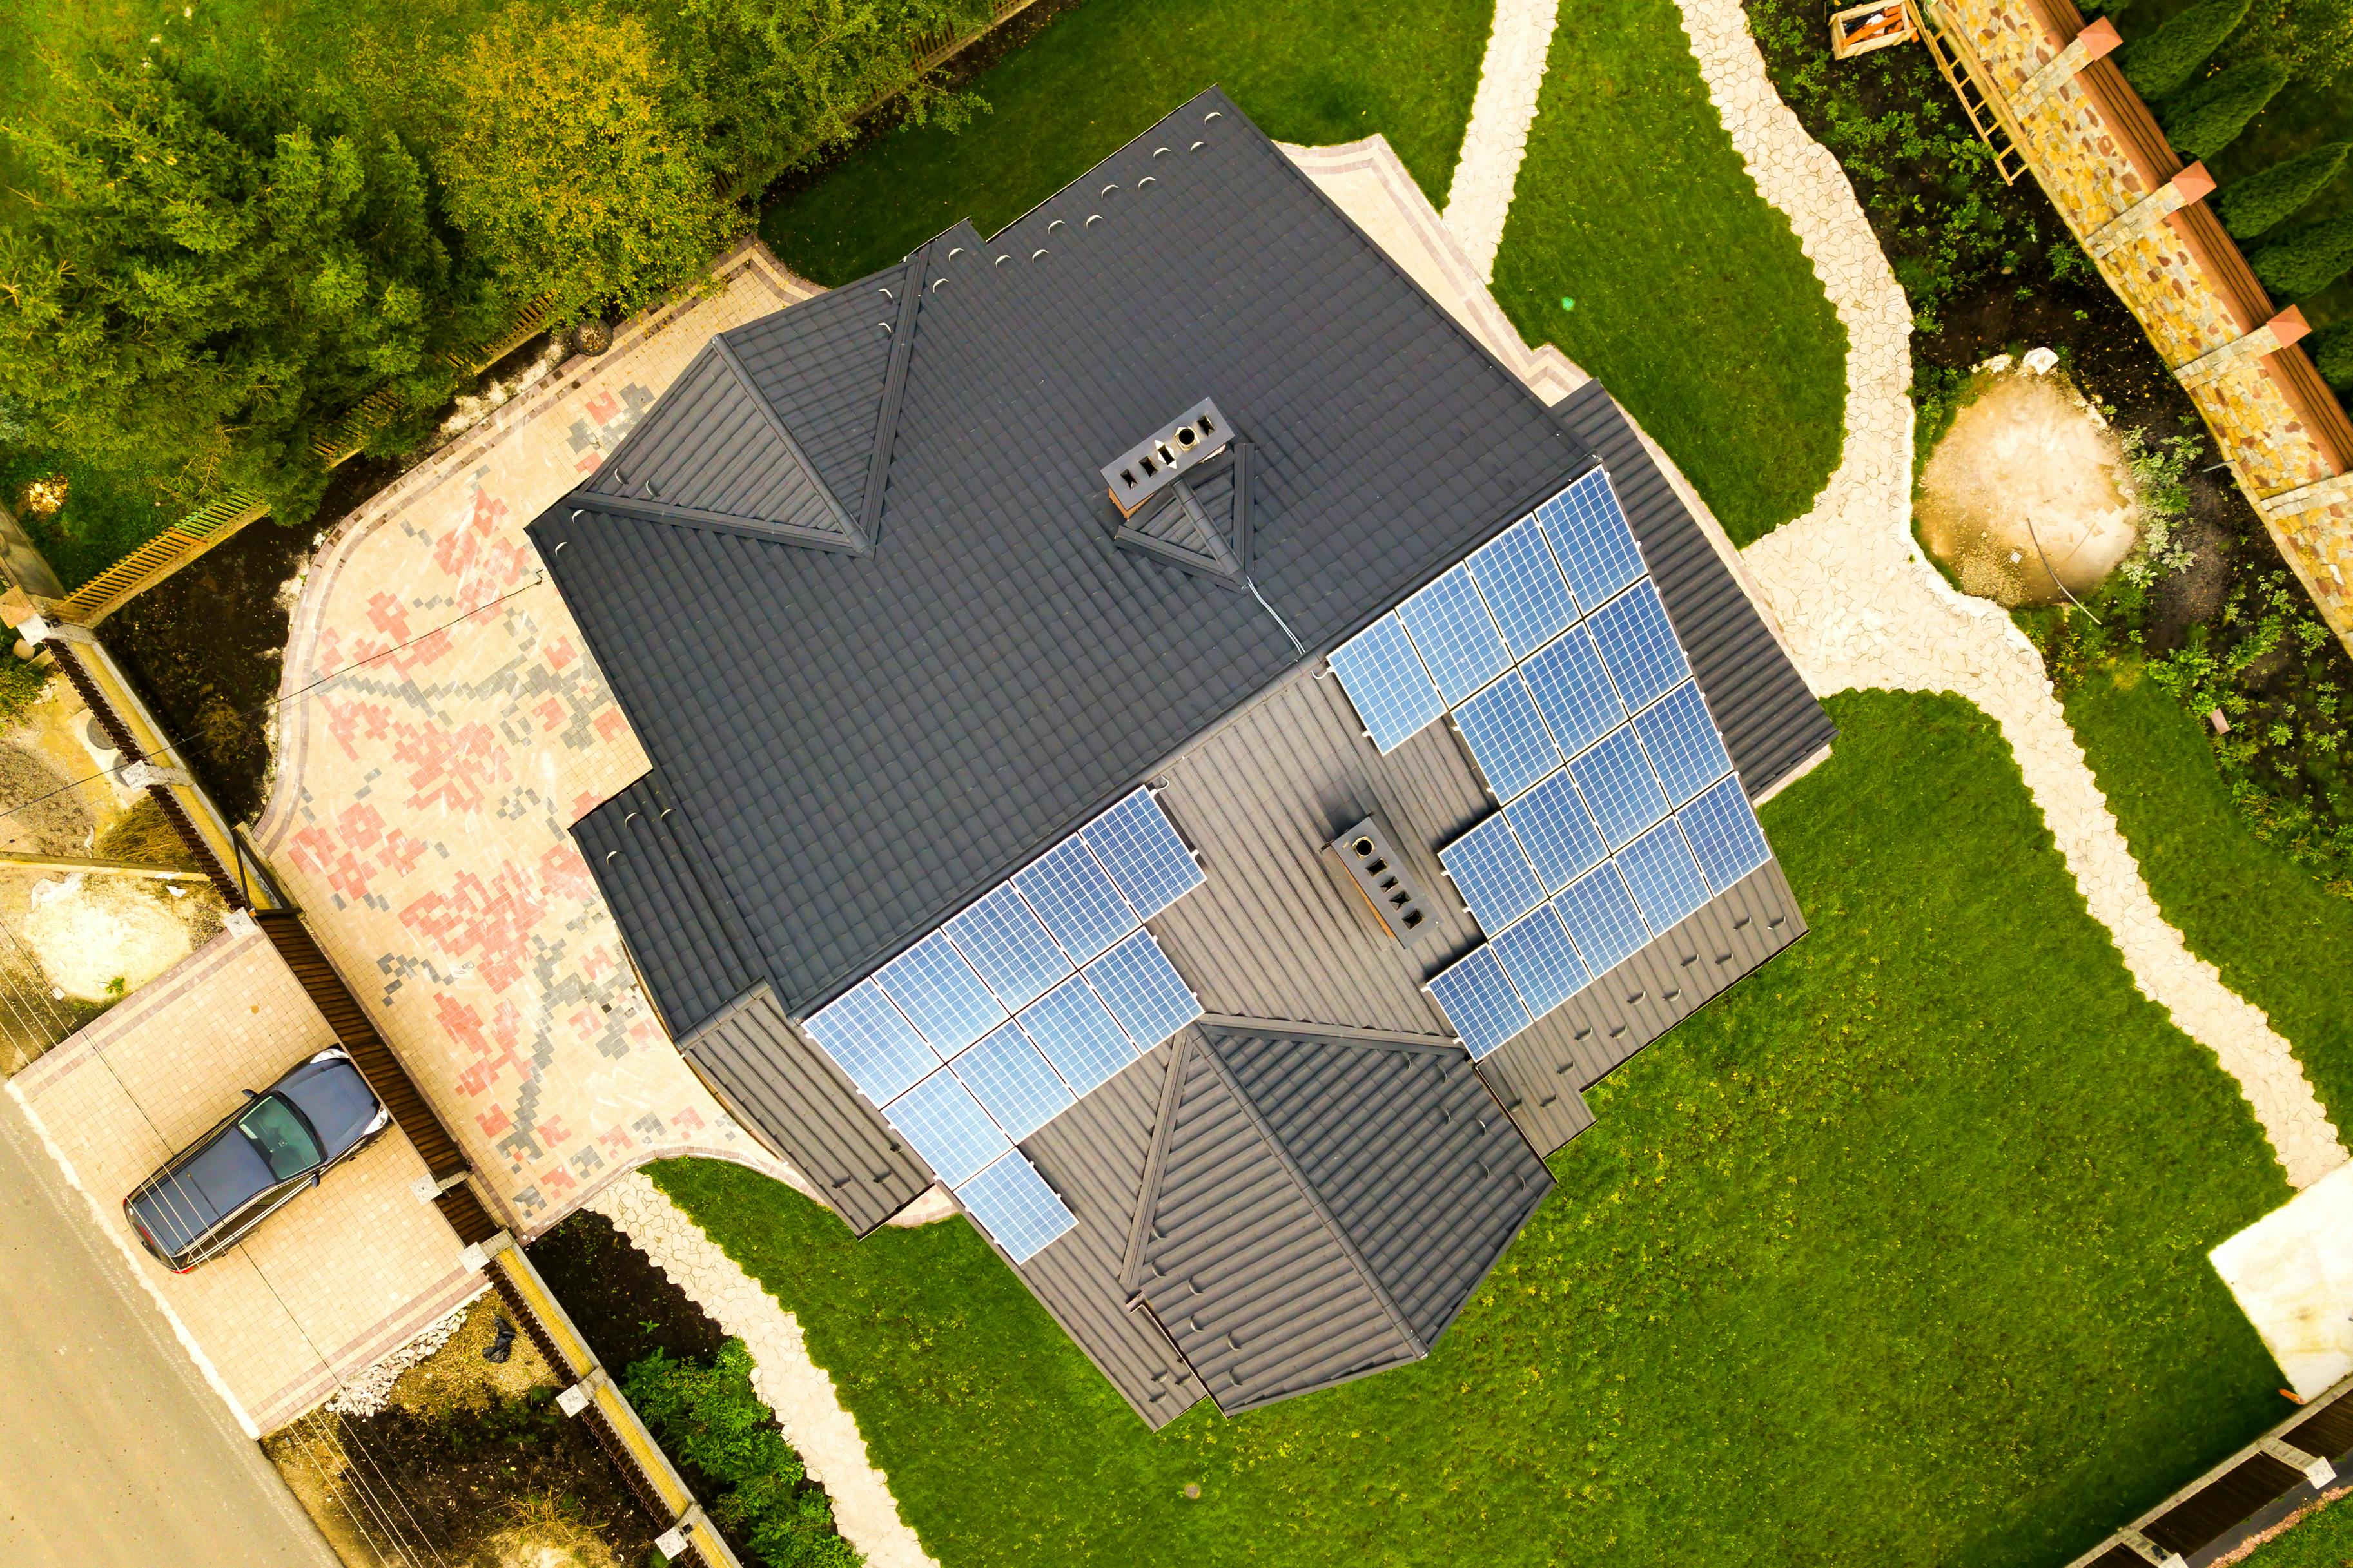 Aerial view of a house with solar panels